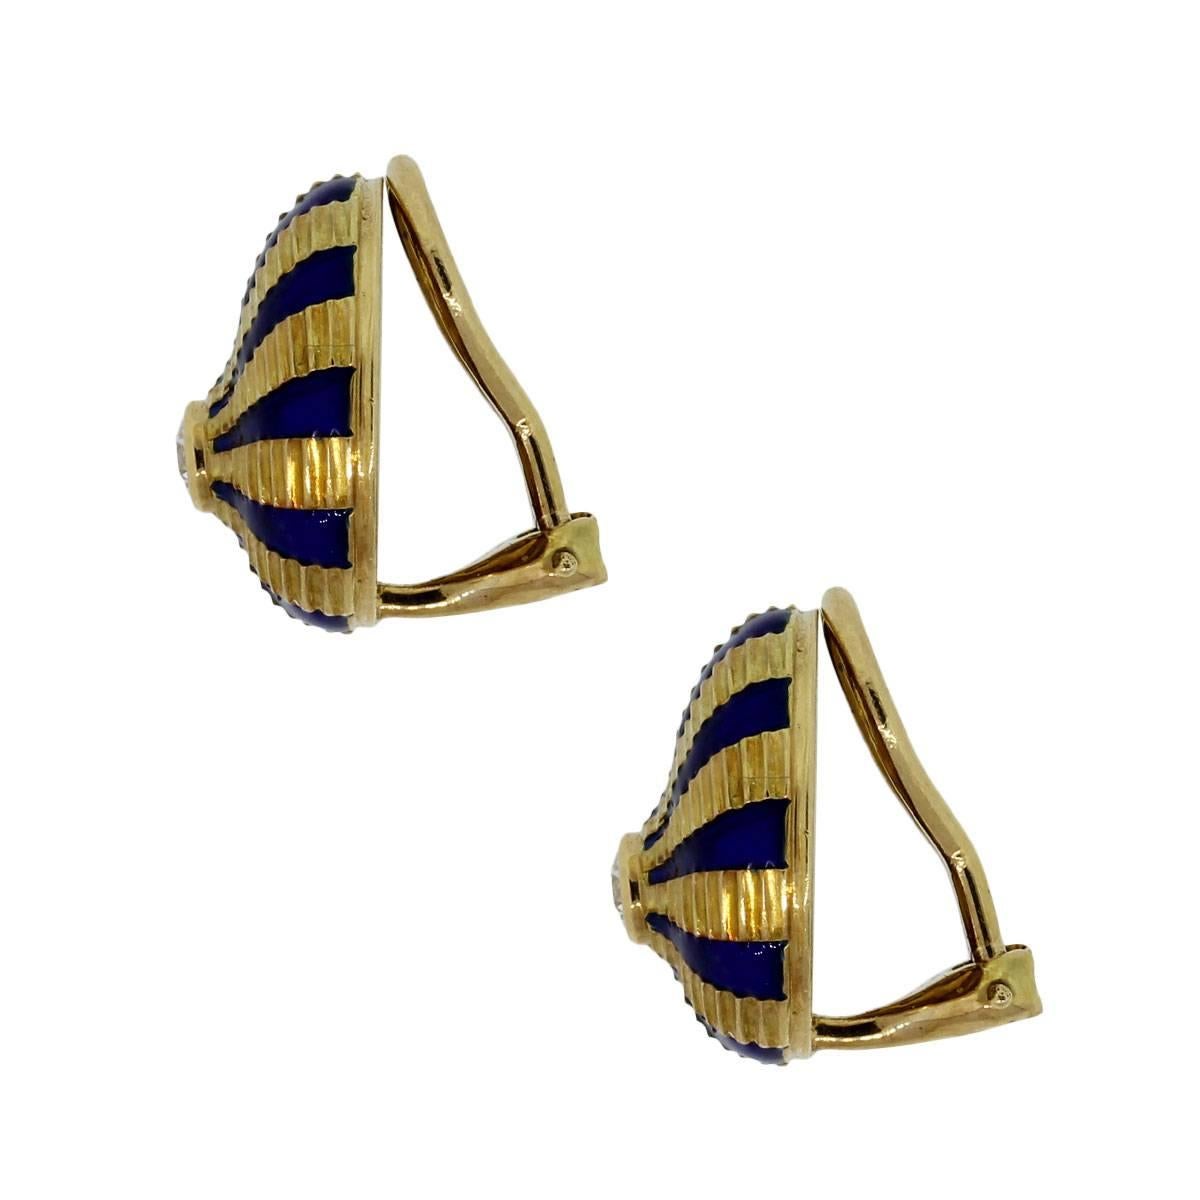 Designer: Tiffany & Co.
Style: Taj Mahal
Material: 18k Yellow Gold with Blue Enamel inlay
Diamond Details: Approximately 0.40ctw of round brilliant diamonds, diamonds are F/G in color and VS in clarity.
Measurements: 0.68